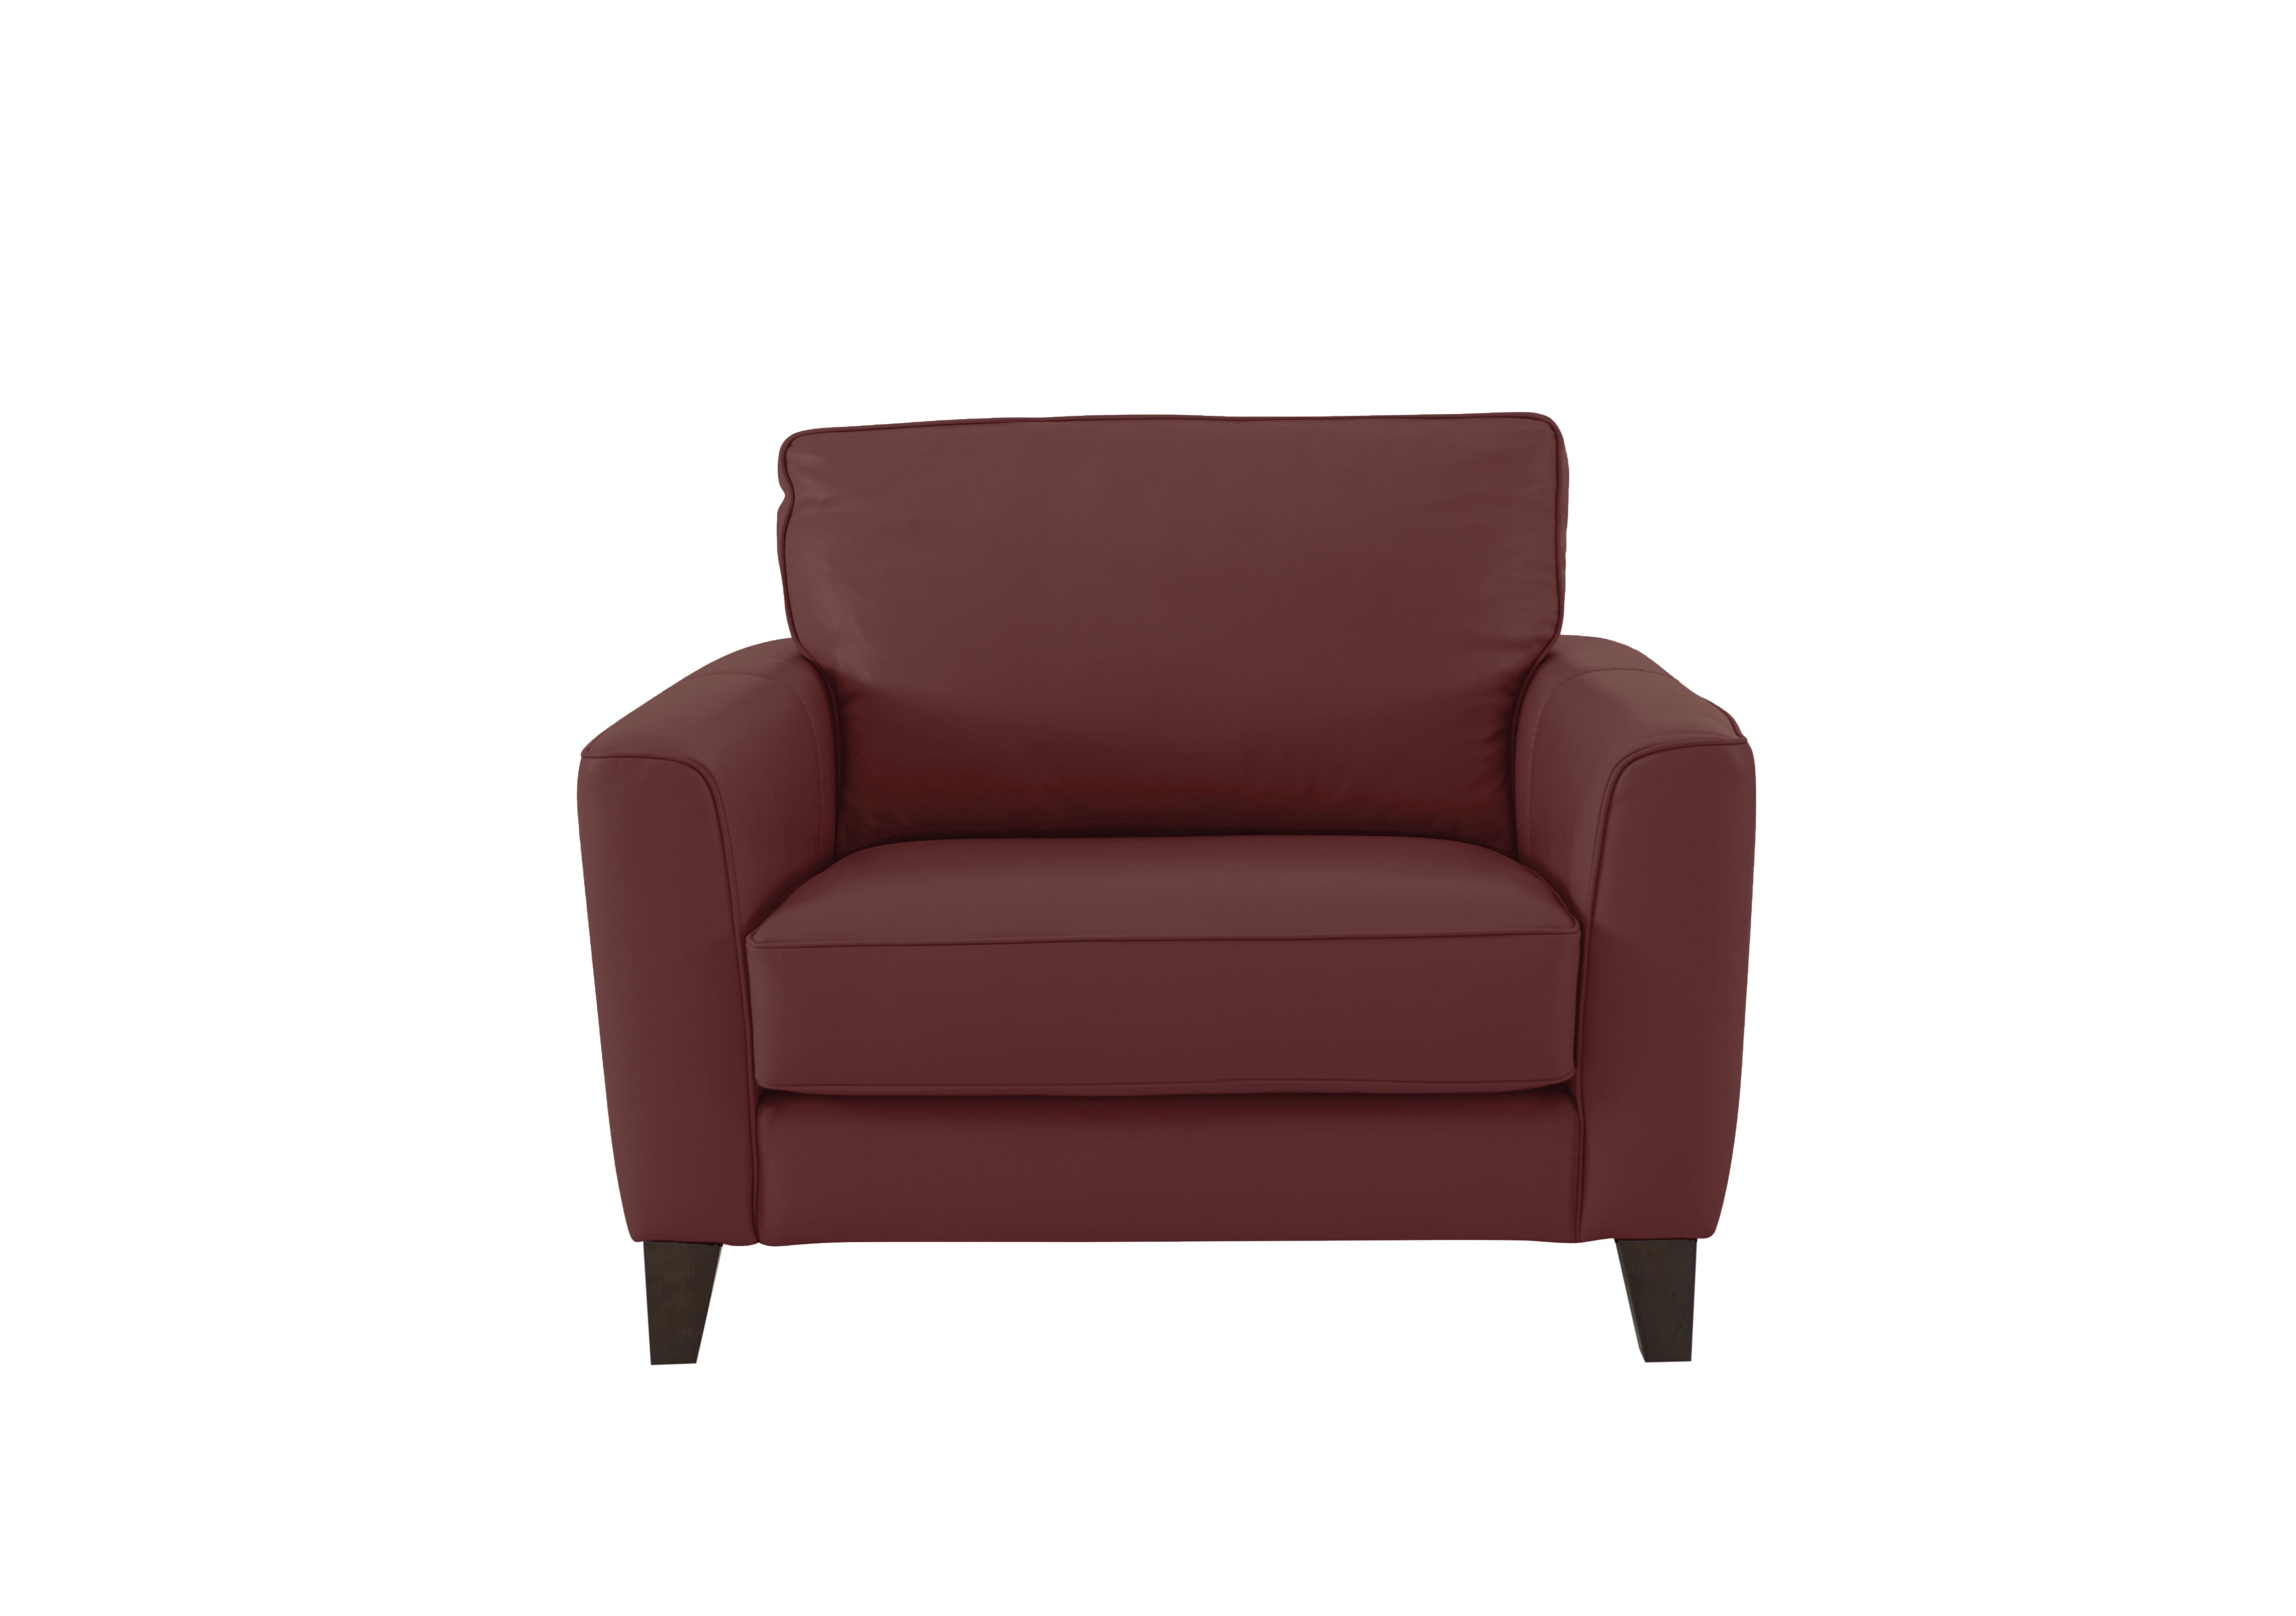 Brondby Leather Cuddle Chair in Bv-035c Deep Red on Furniture Village